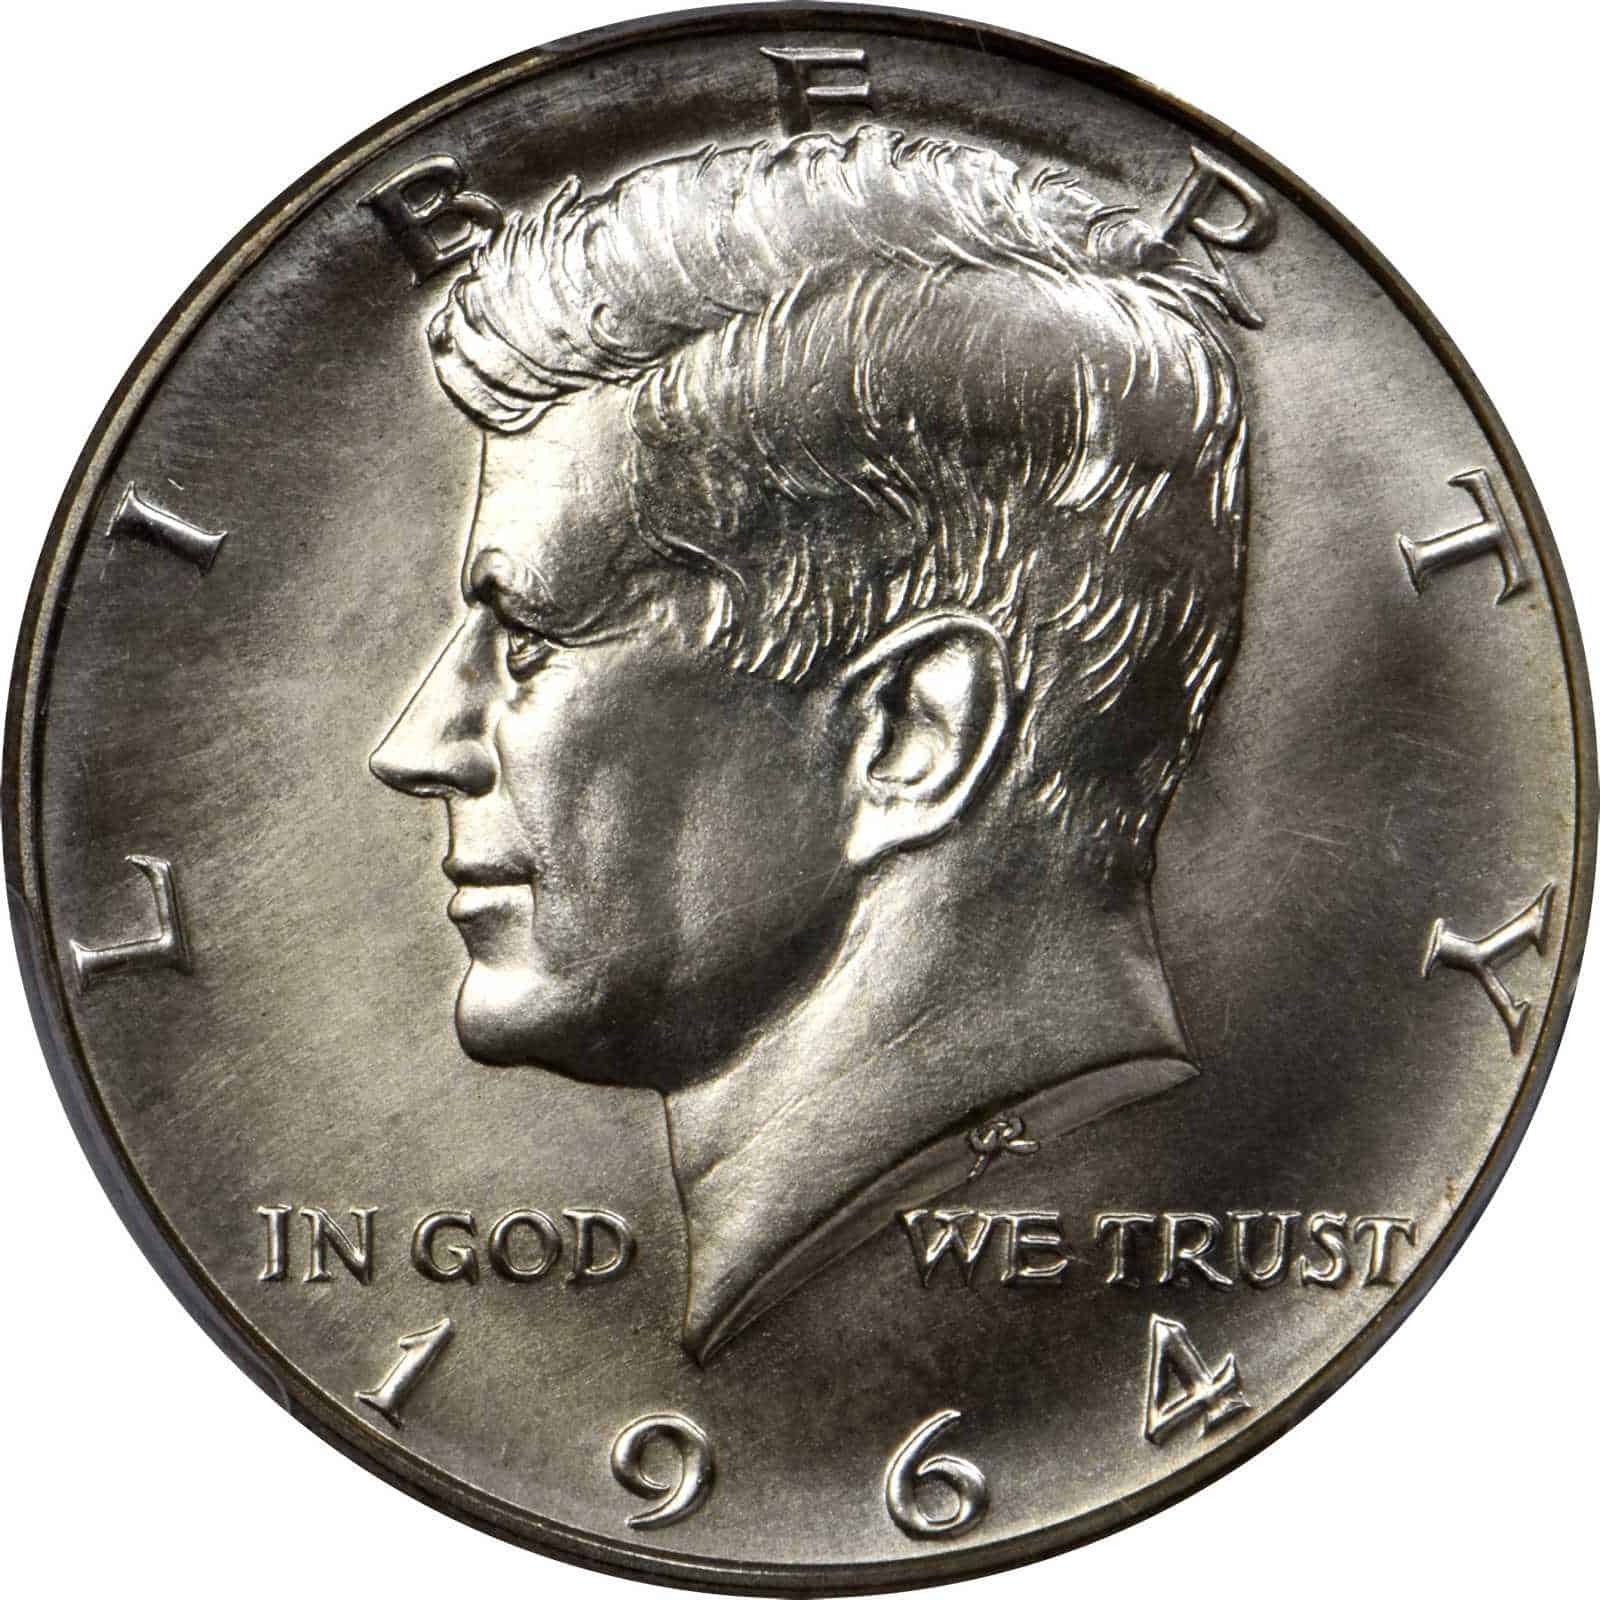 The Obverse of the 1964 Kennedy Half Dollar